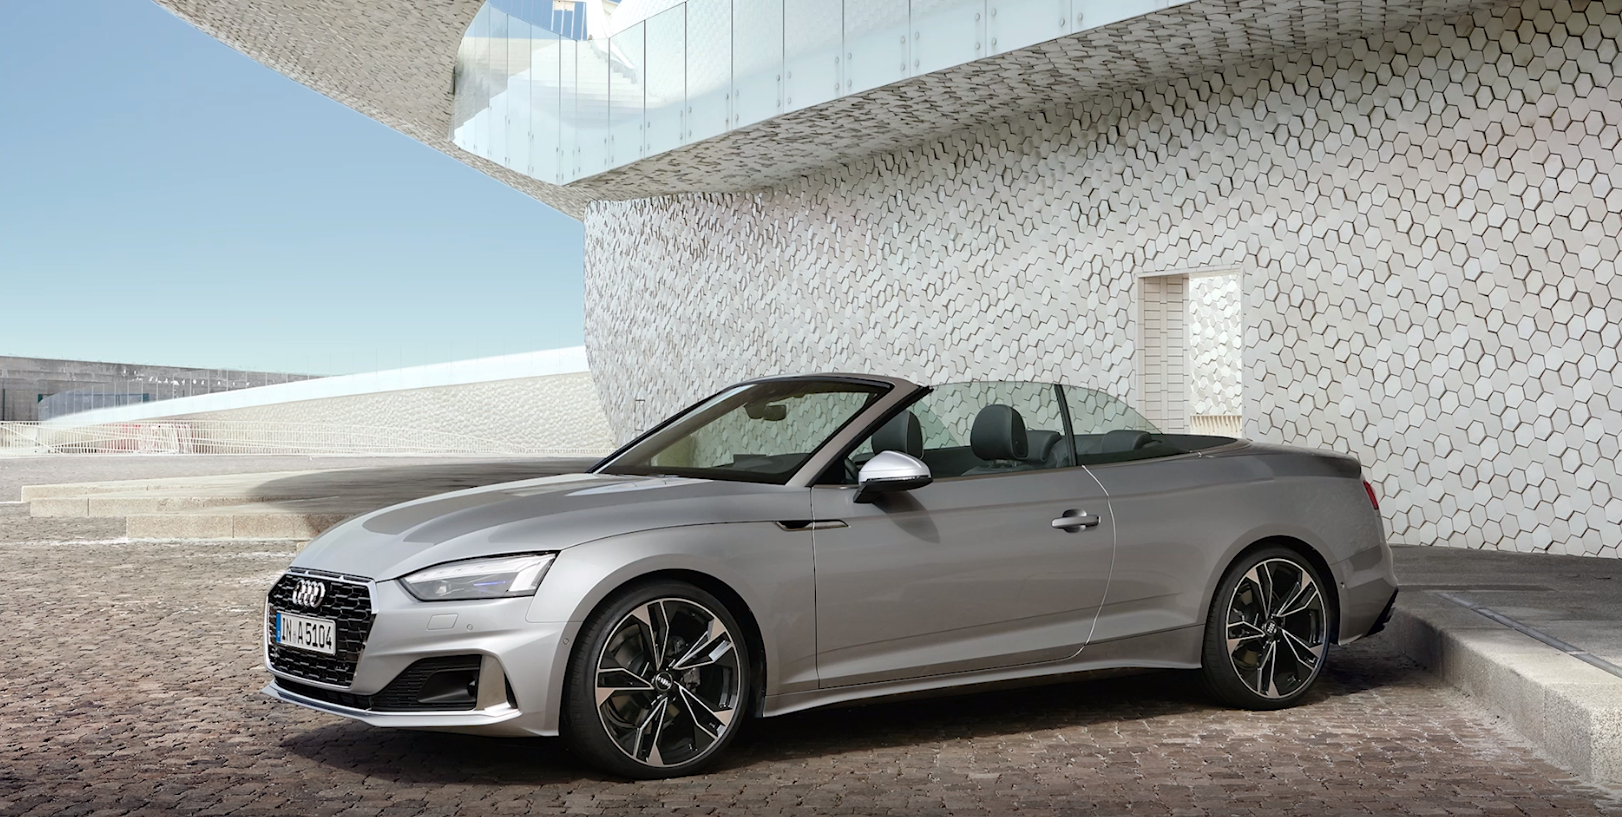 Side view of the Audi A5 Cabriolet with the roof down